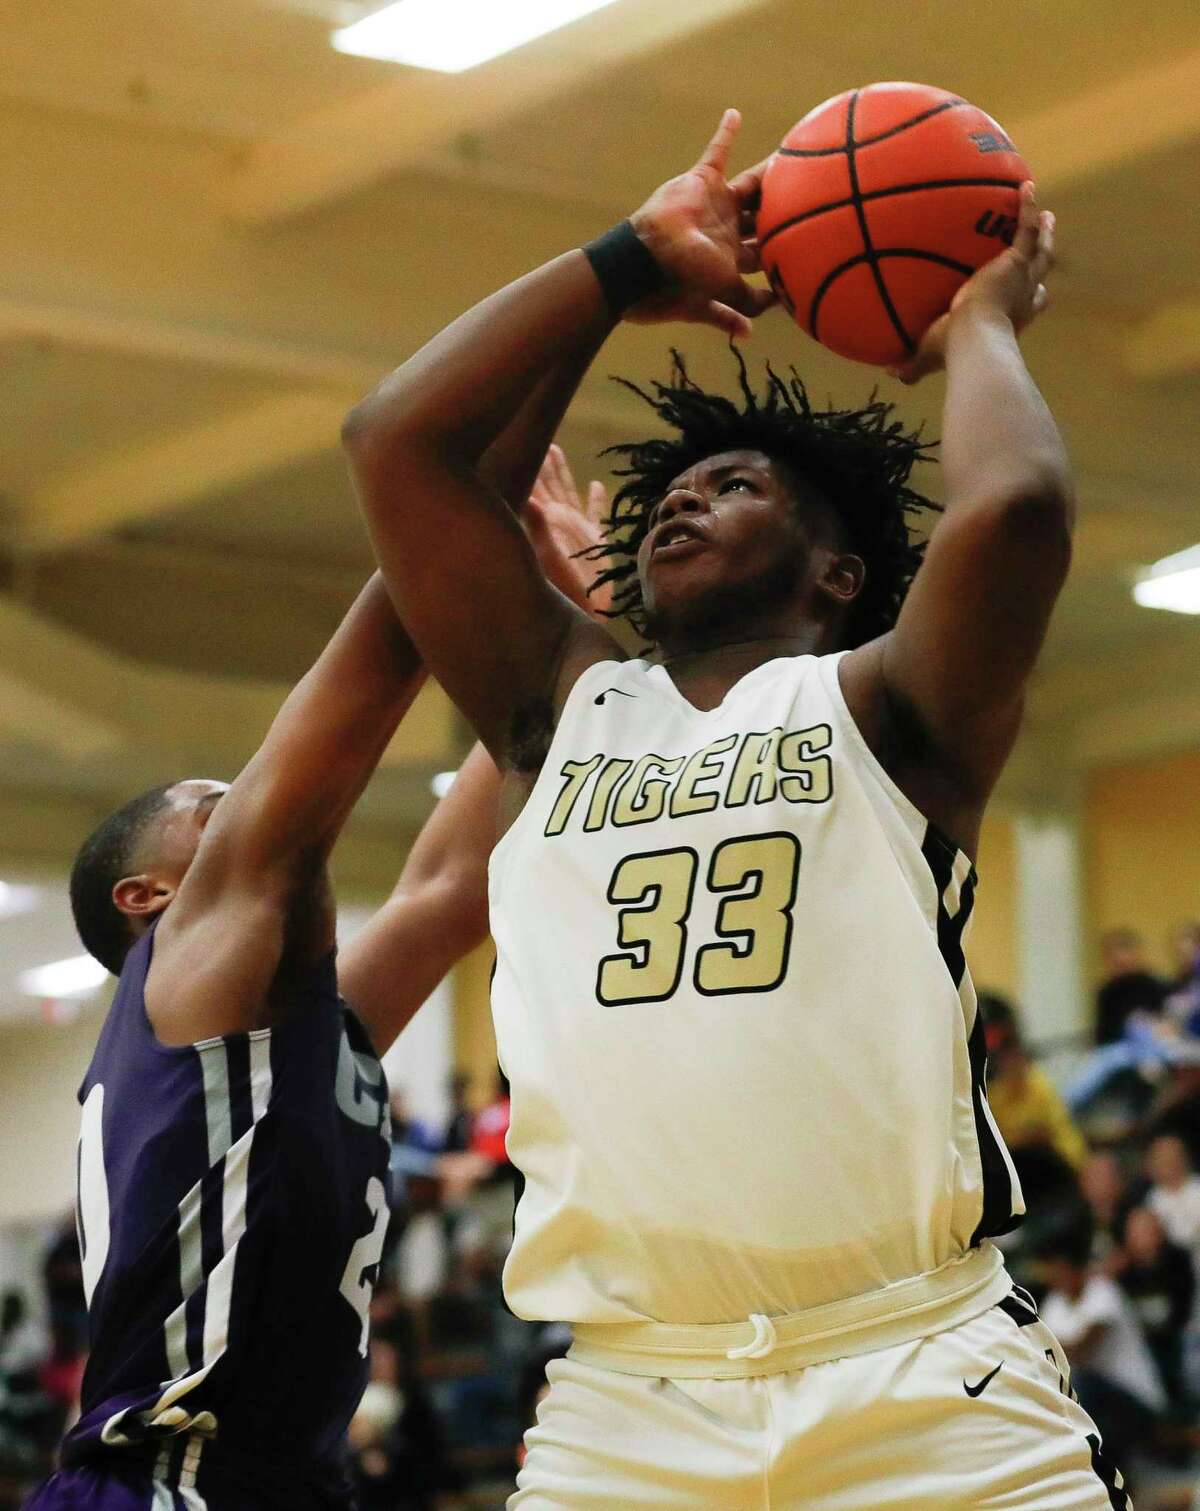 After a season that saw him join and succeed at the varsity level, Conroe’s Ka’Mari Weatherspoon is The Courier’s Newcomer of the Year.